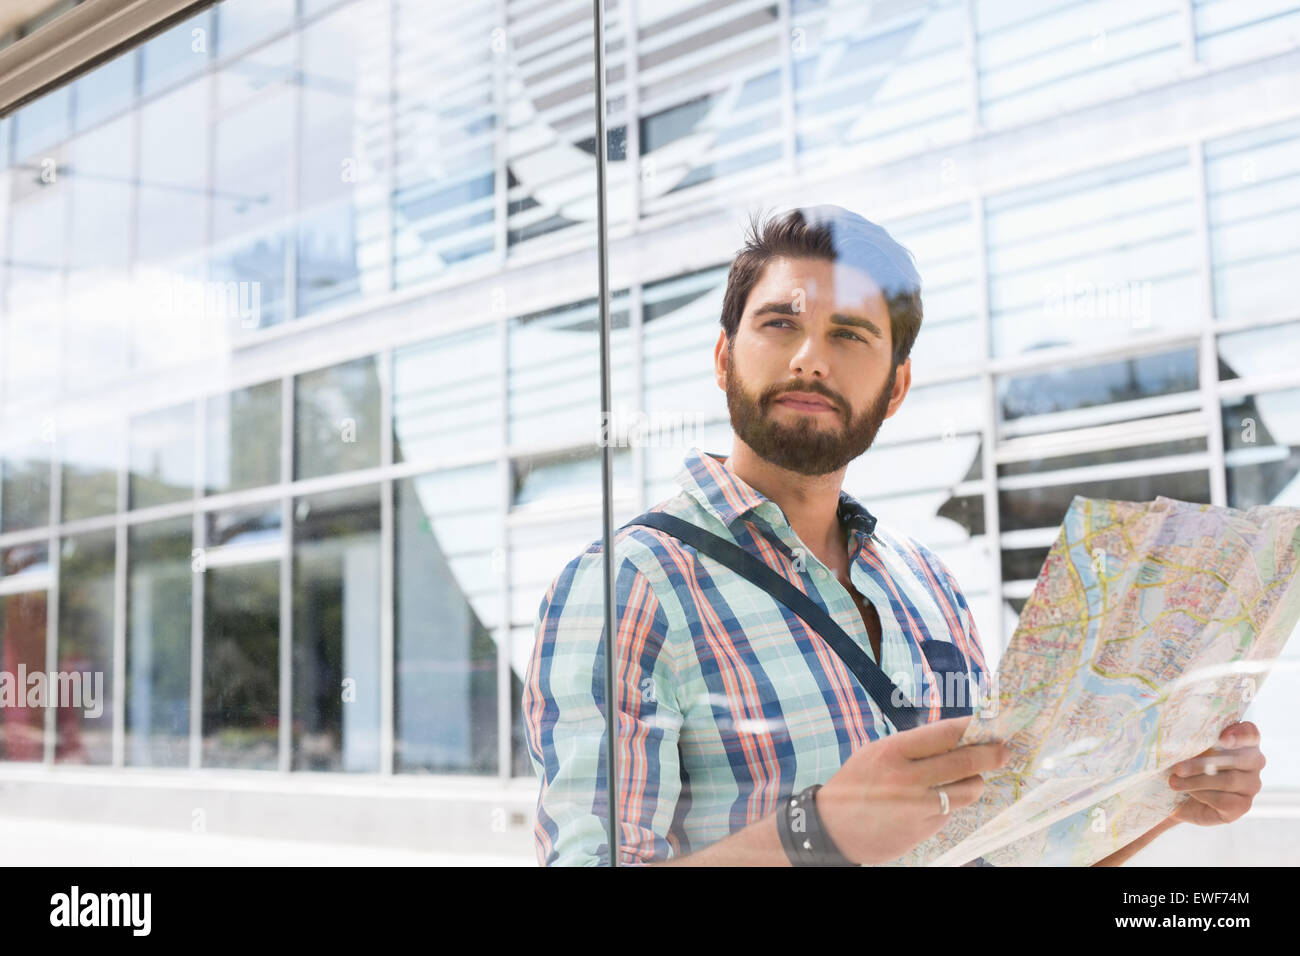 Thoughtful man looking away while holding road map against glass wall Stock Photo